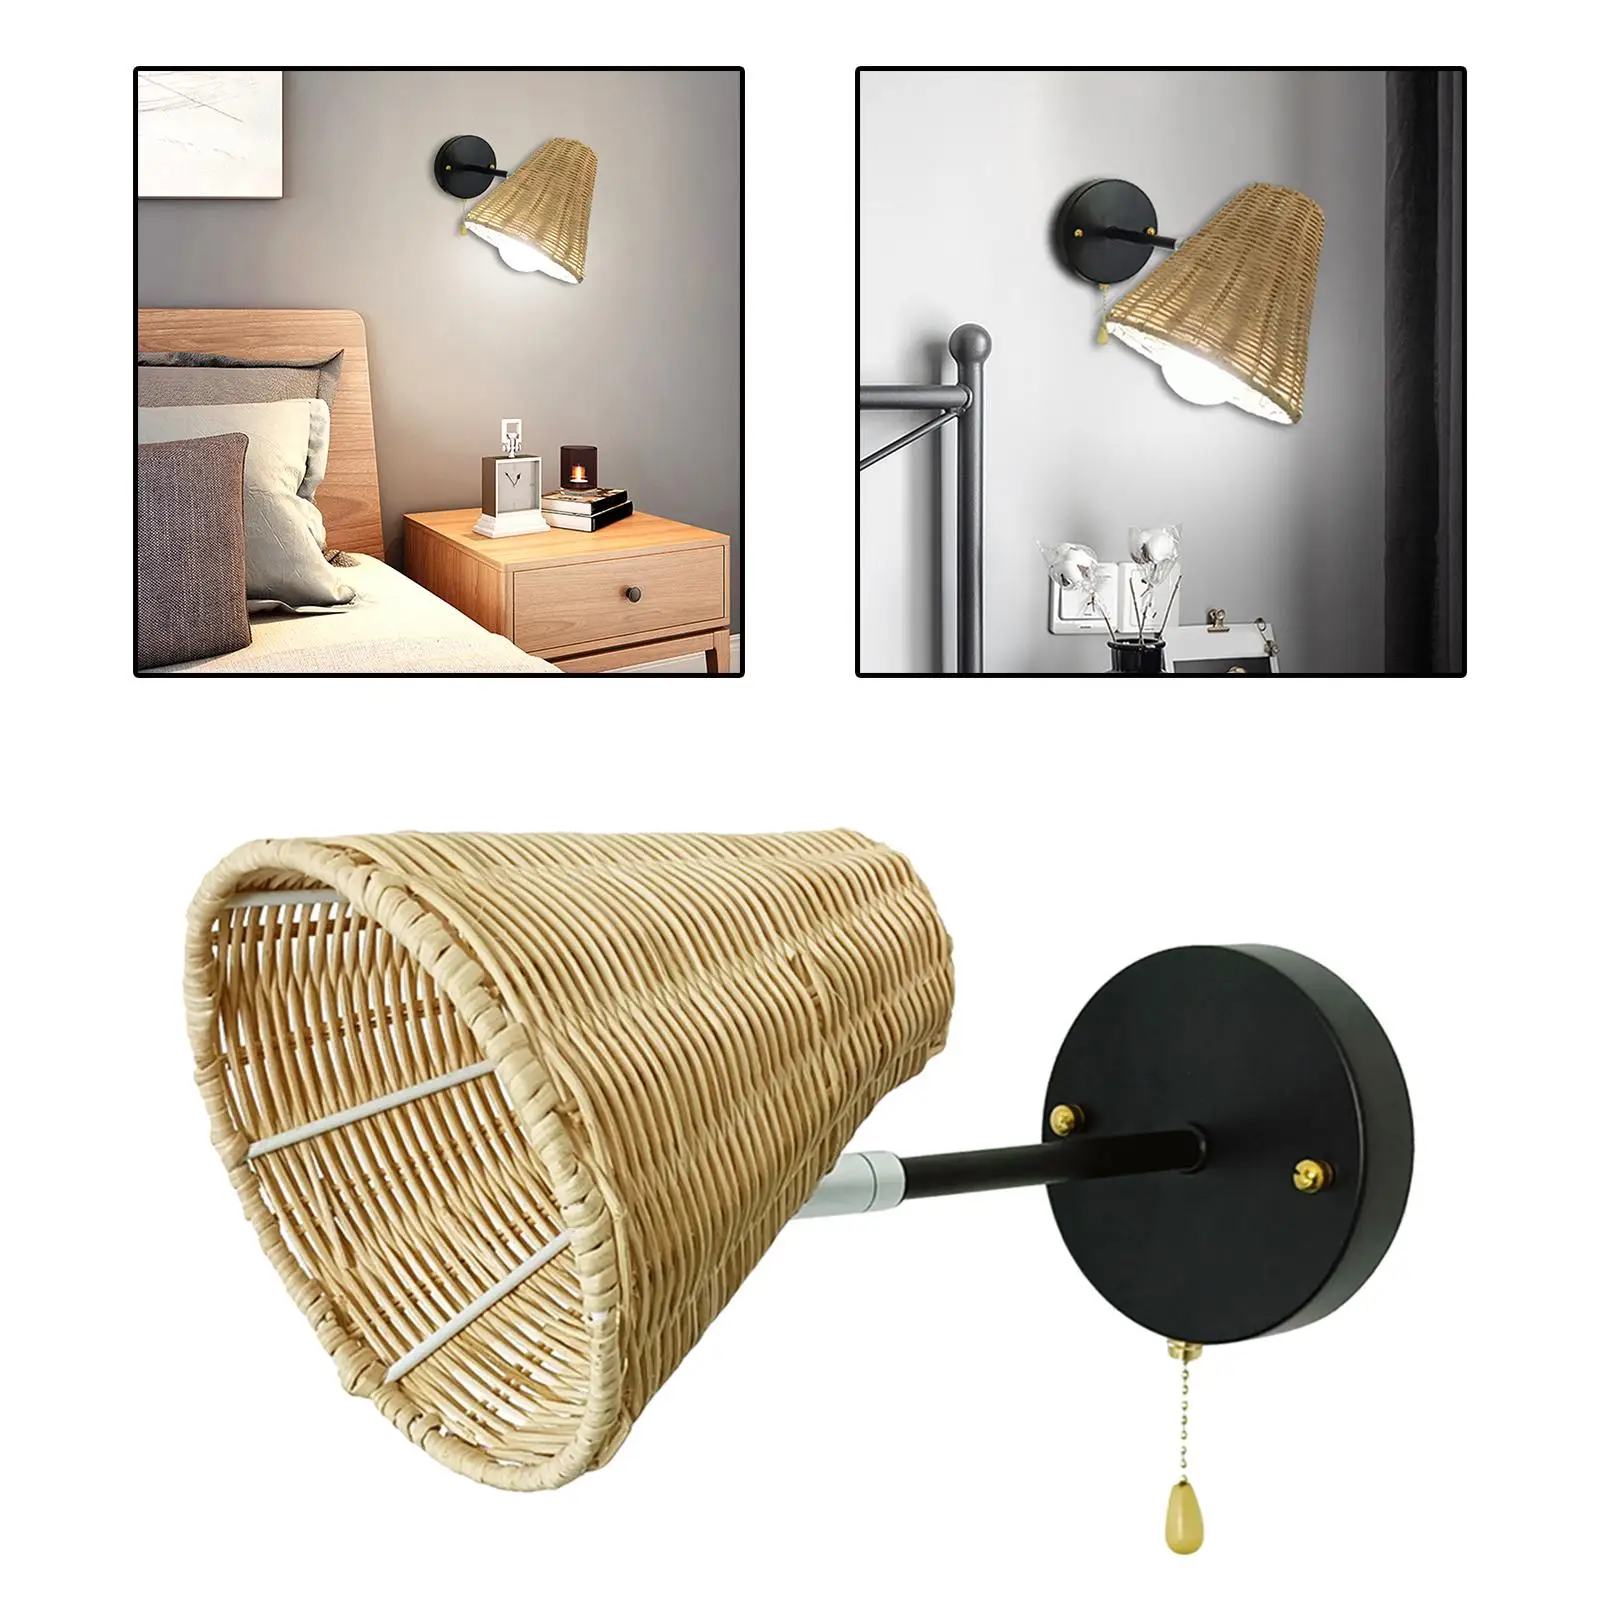 Adjustable Wall Lamp Light Lighting Fixture Sconce with Pull Chain Switch for Bedroom Bedside House Living Room Hallway Decor